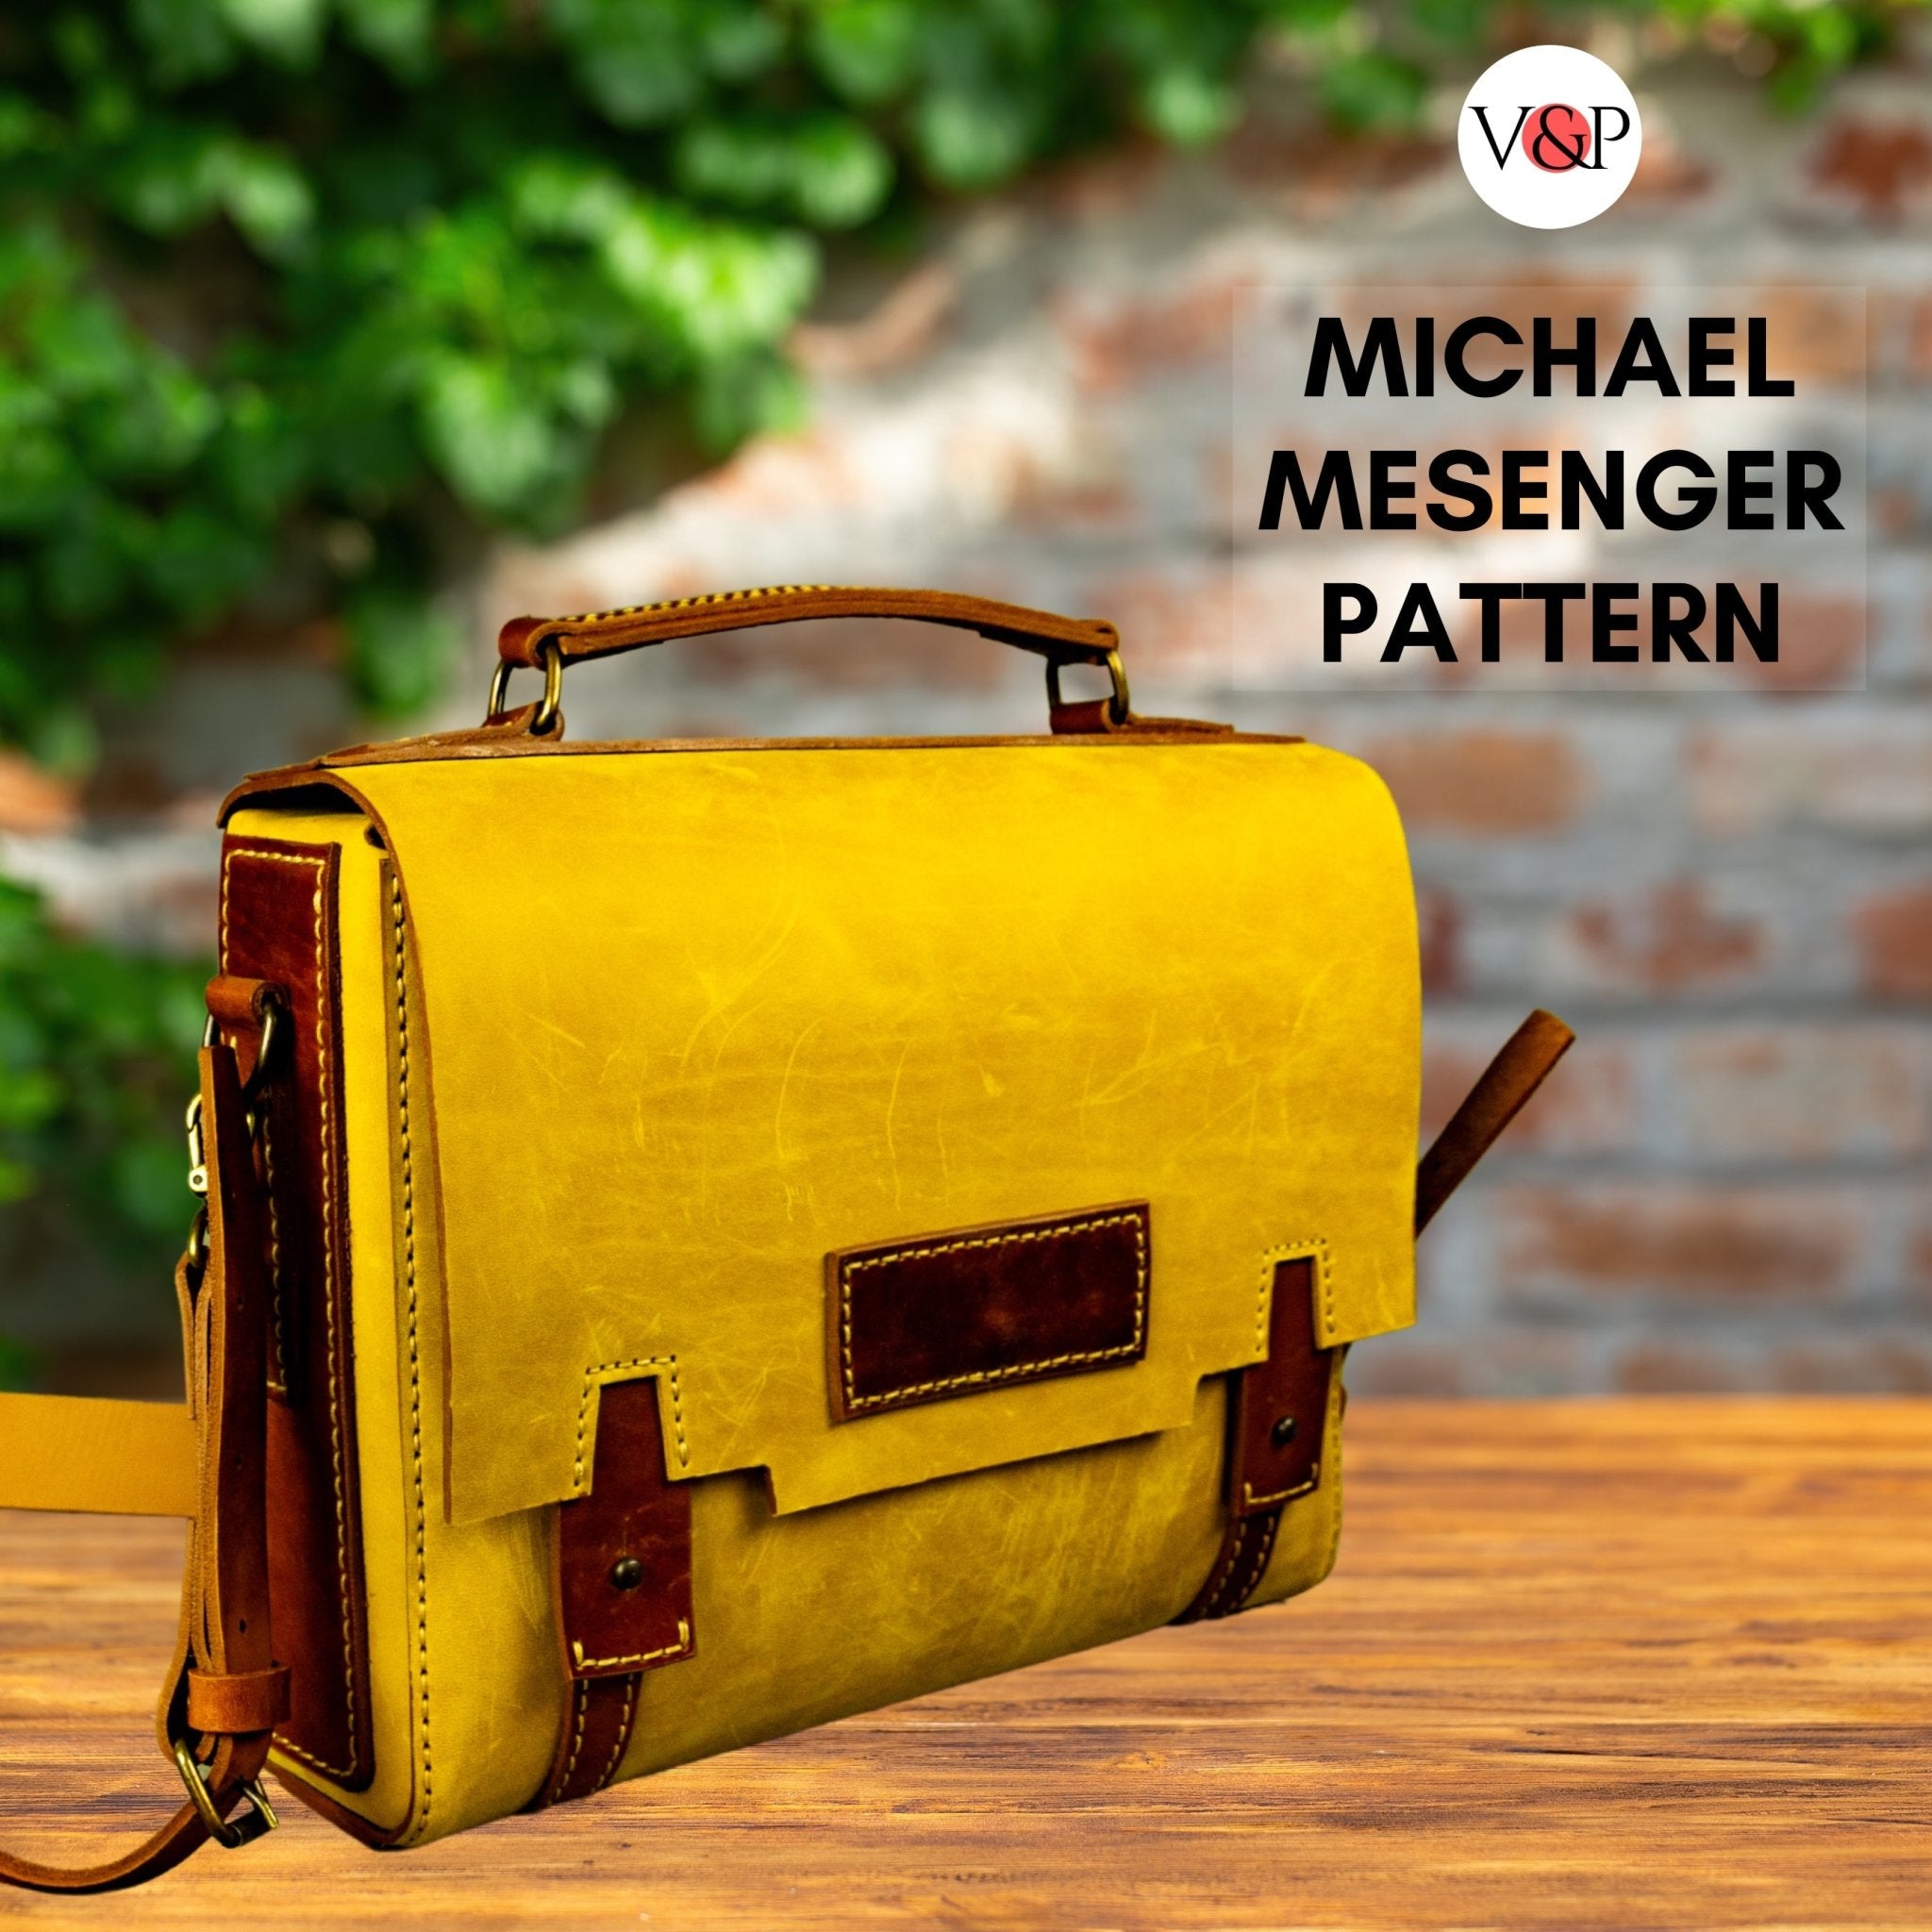 Michael Messenger, PDF Pattern And Instructional Video by Vasile and Pavel - Vasile and Pavel Leather Patterns